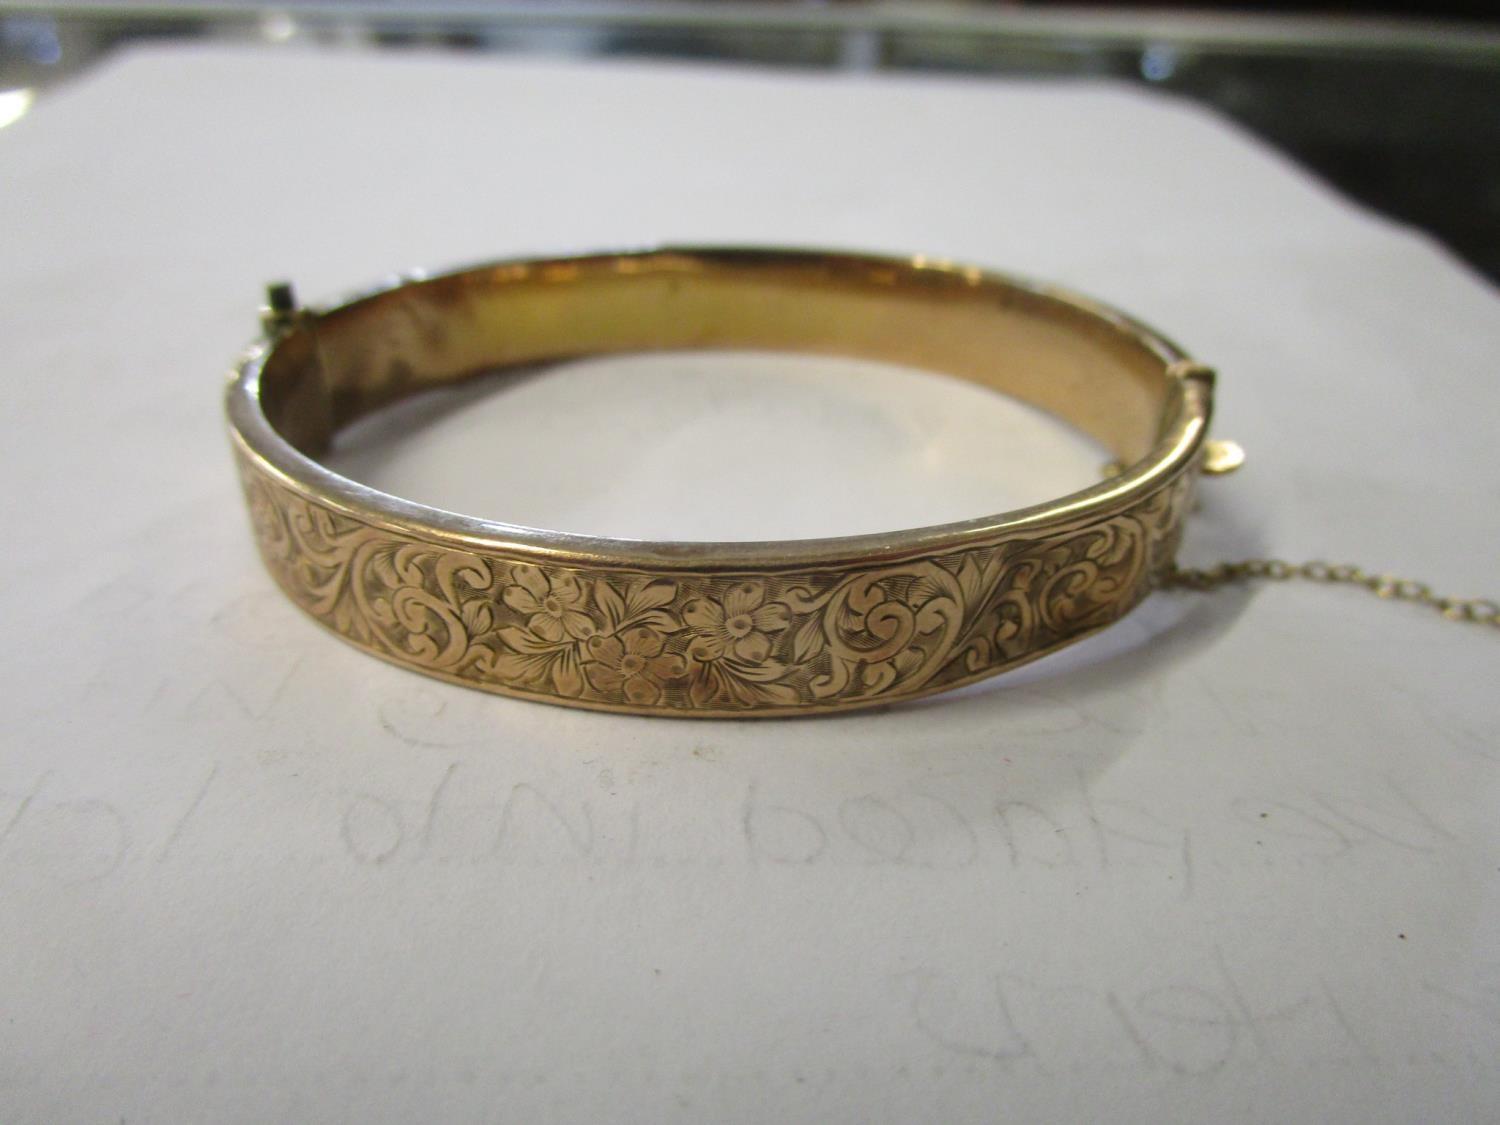 An early 20th century gold bracelet with engraved decoration